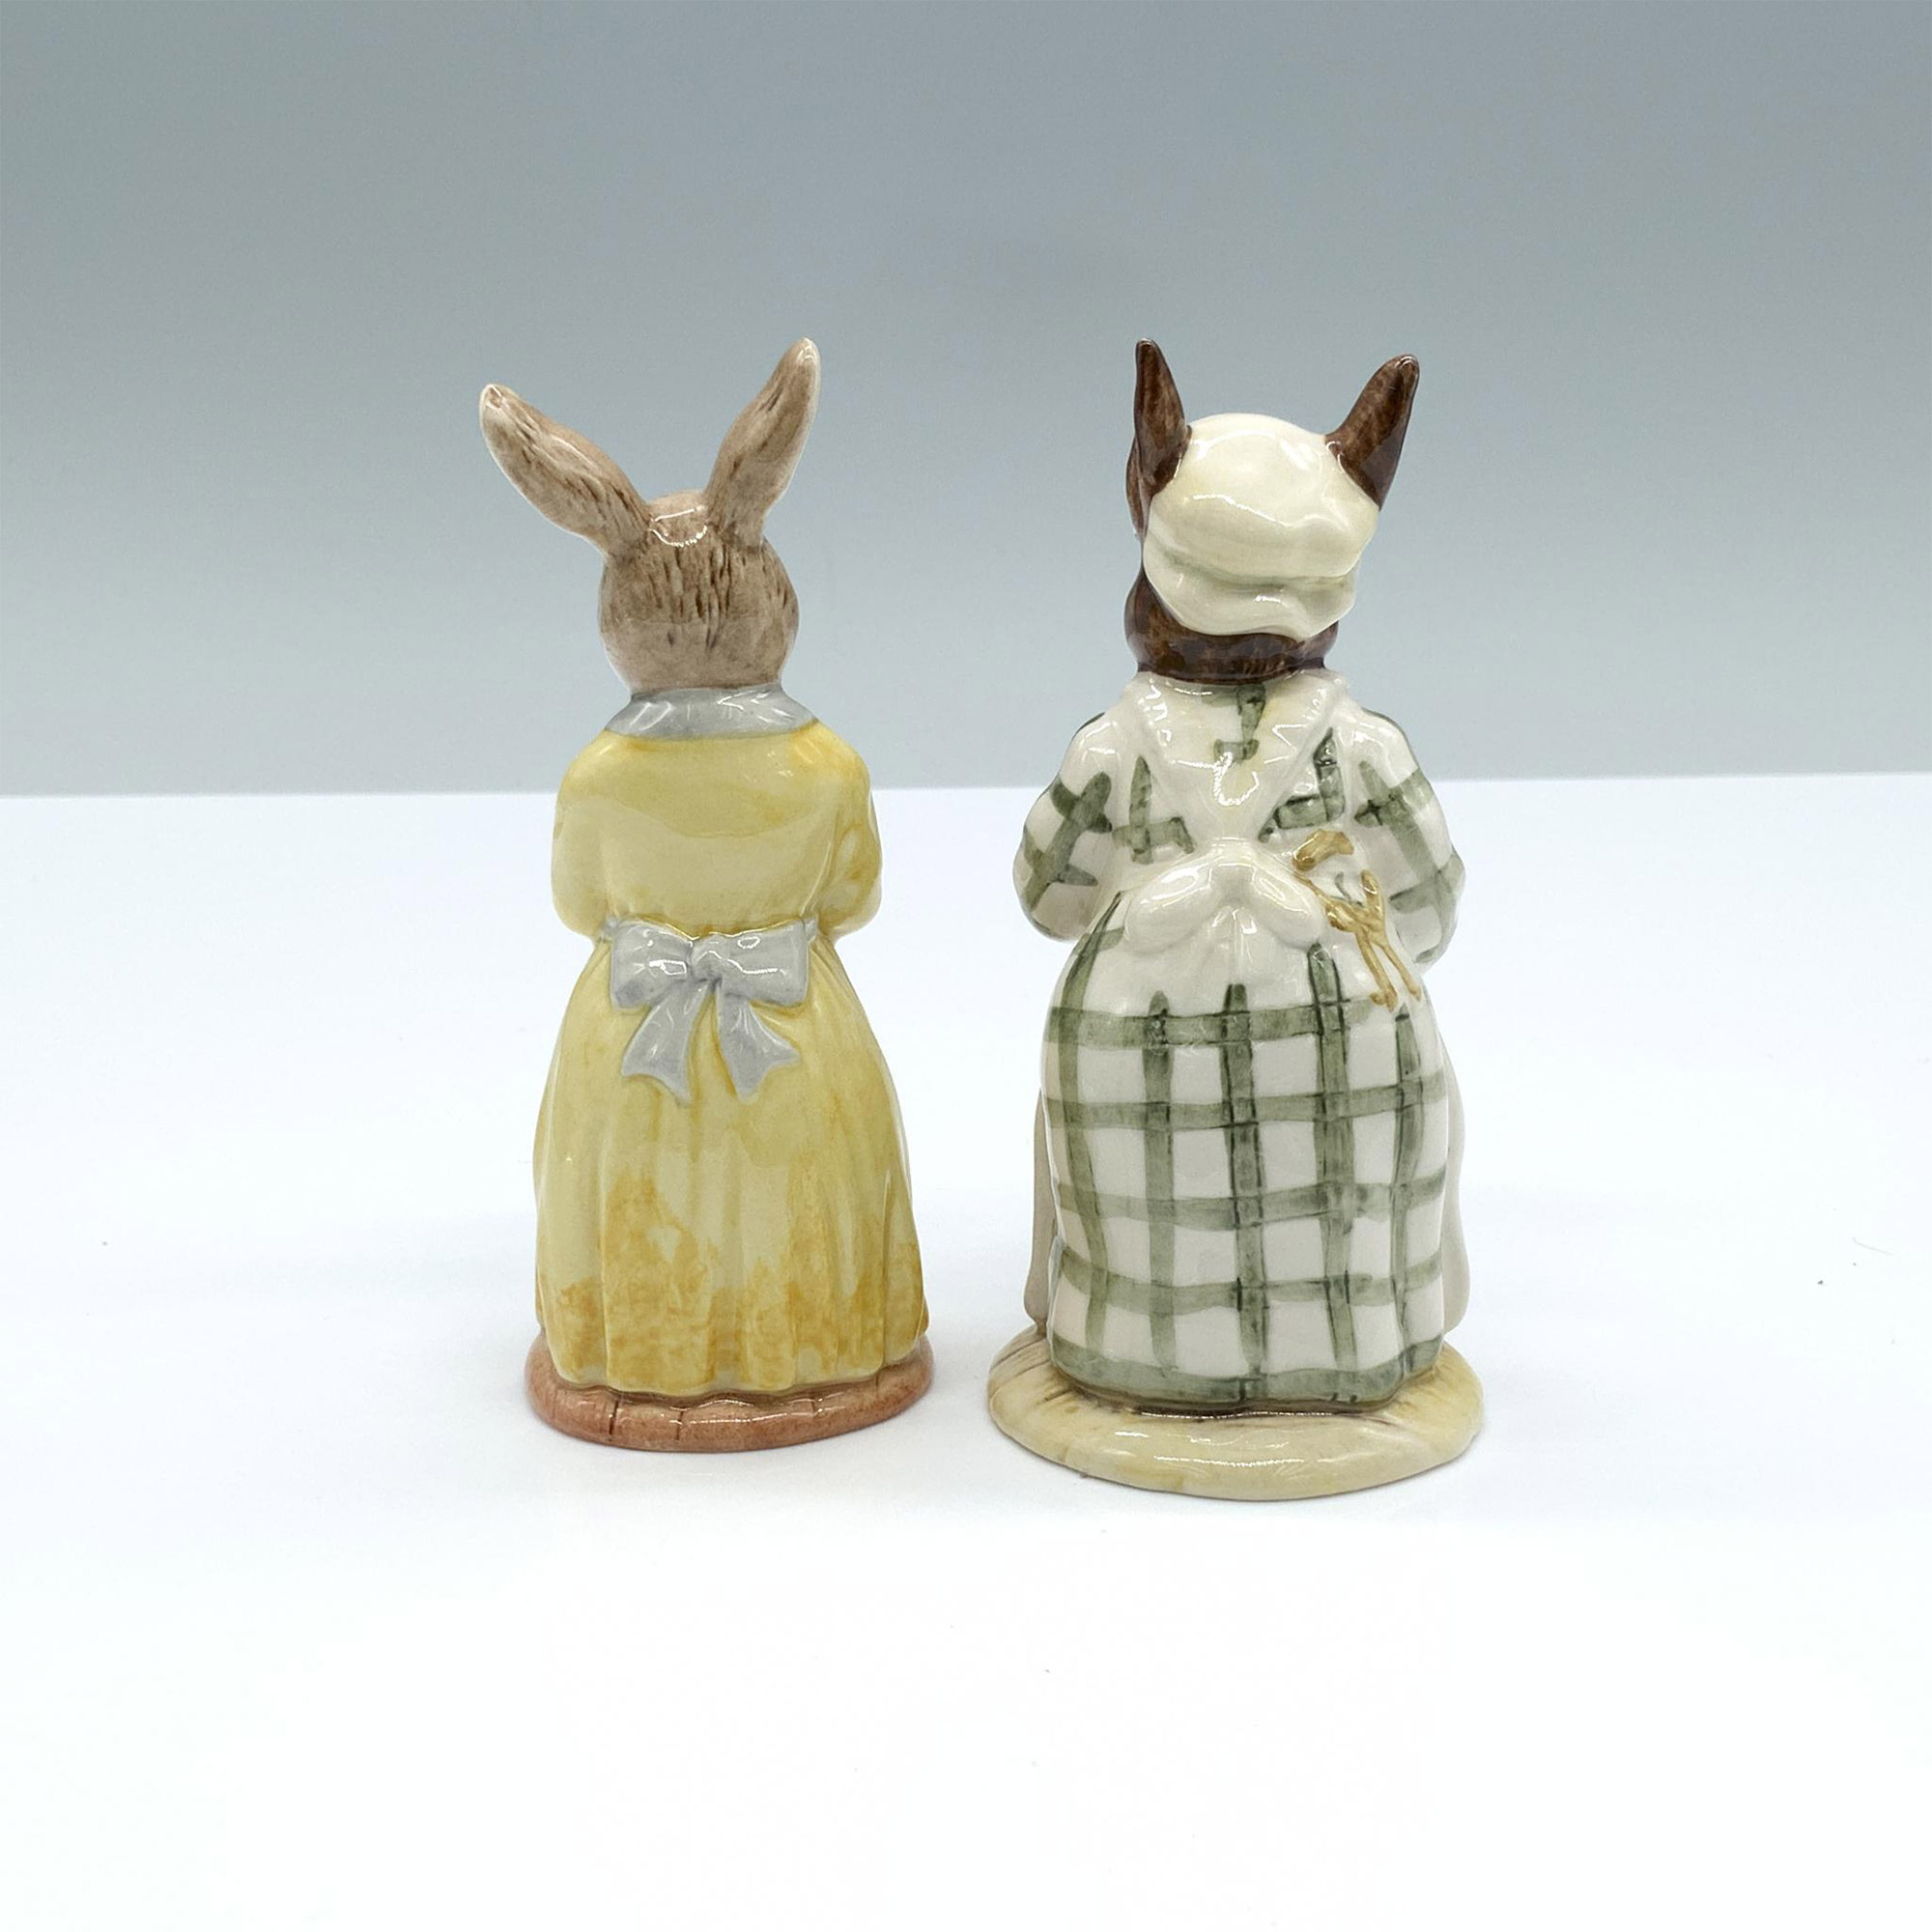 2pc Royal Doulton Bunnykins Figurines, Bakers DB137/85 - Image 2 of 3